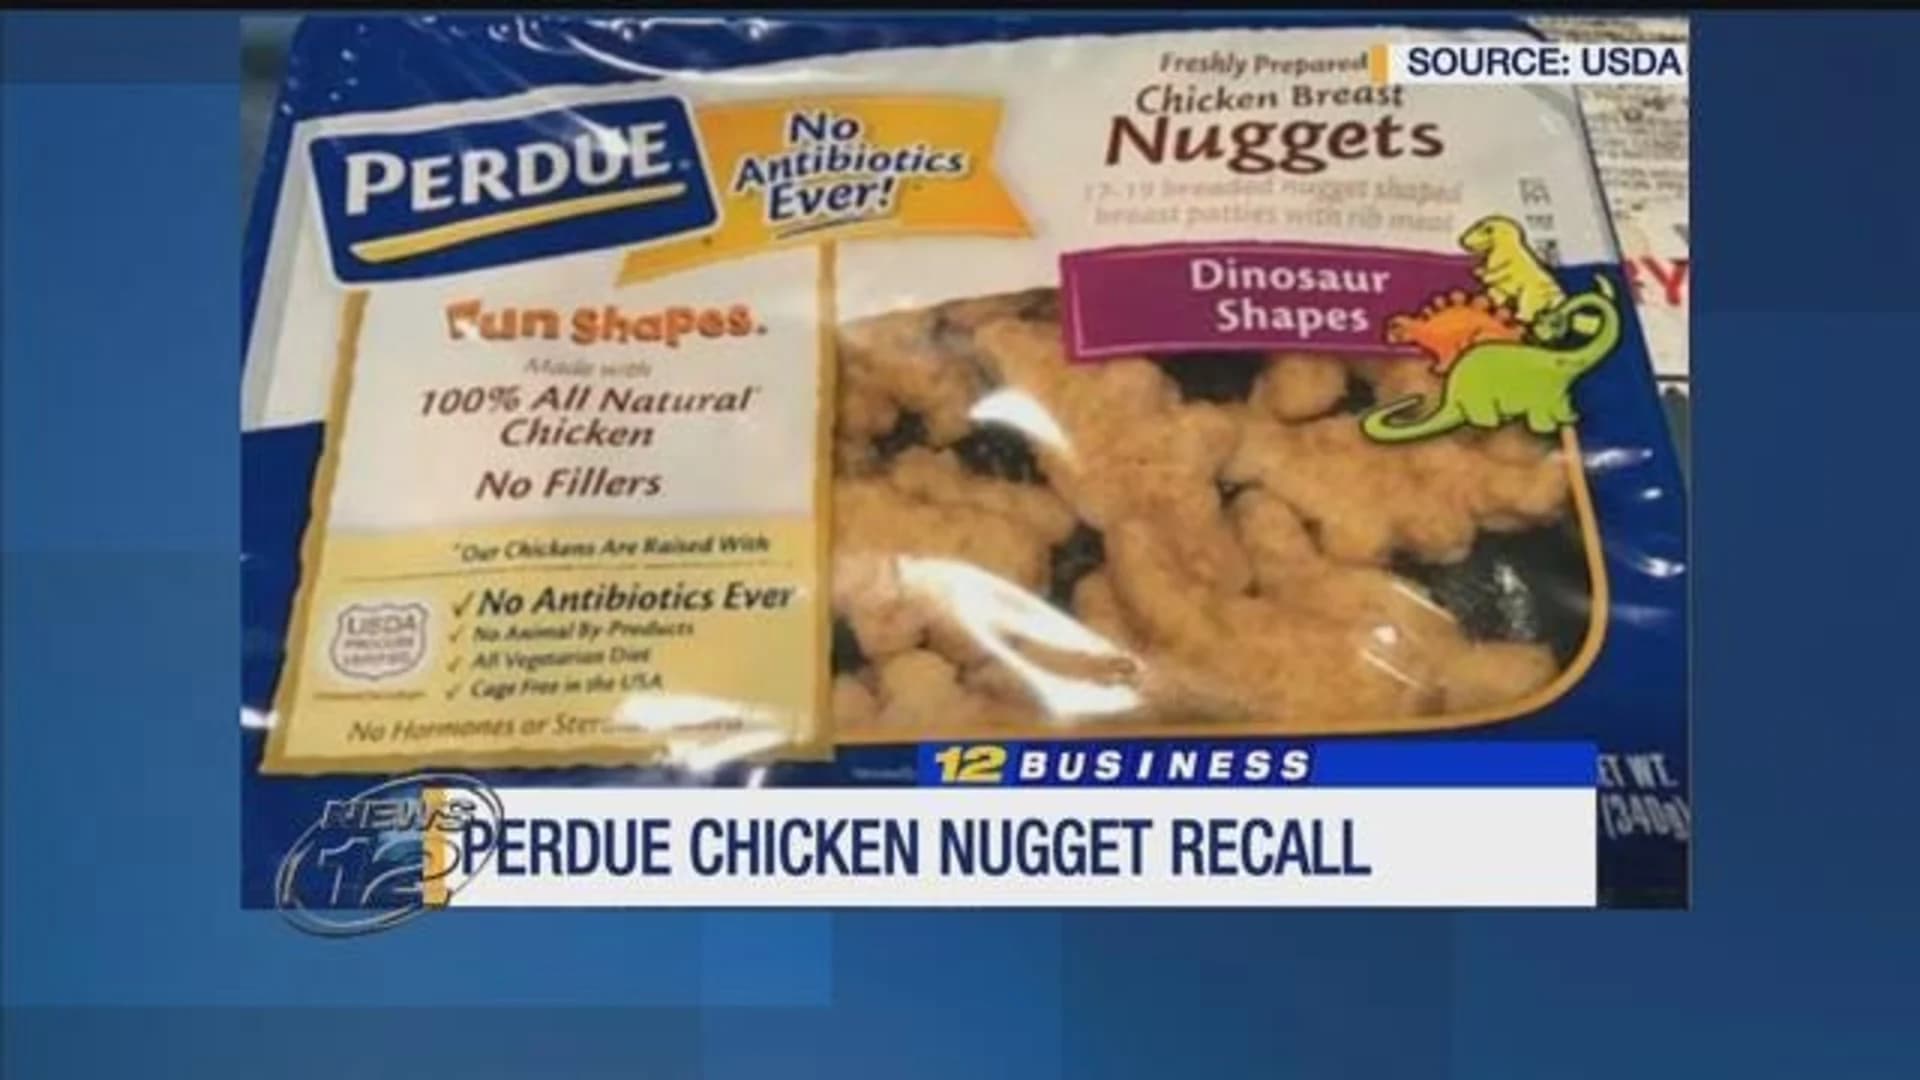 Perdue recalls 16,000 pounds of chicken nuggets